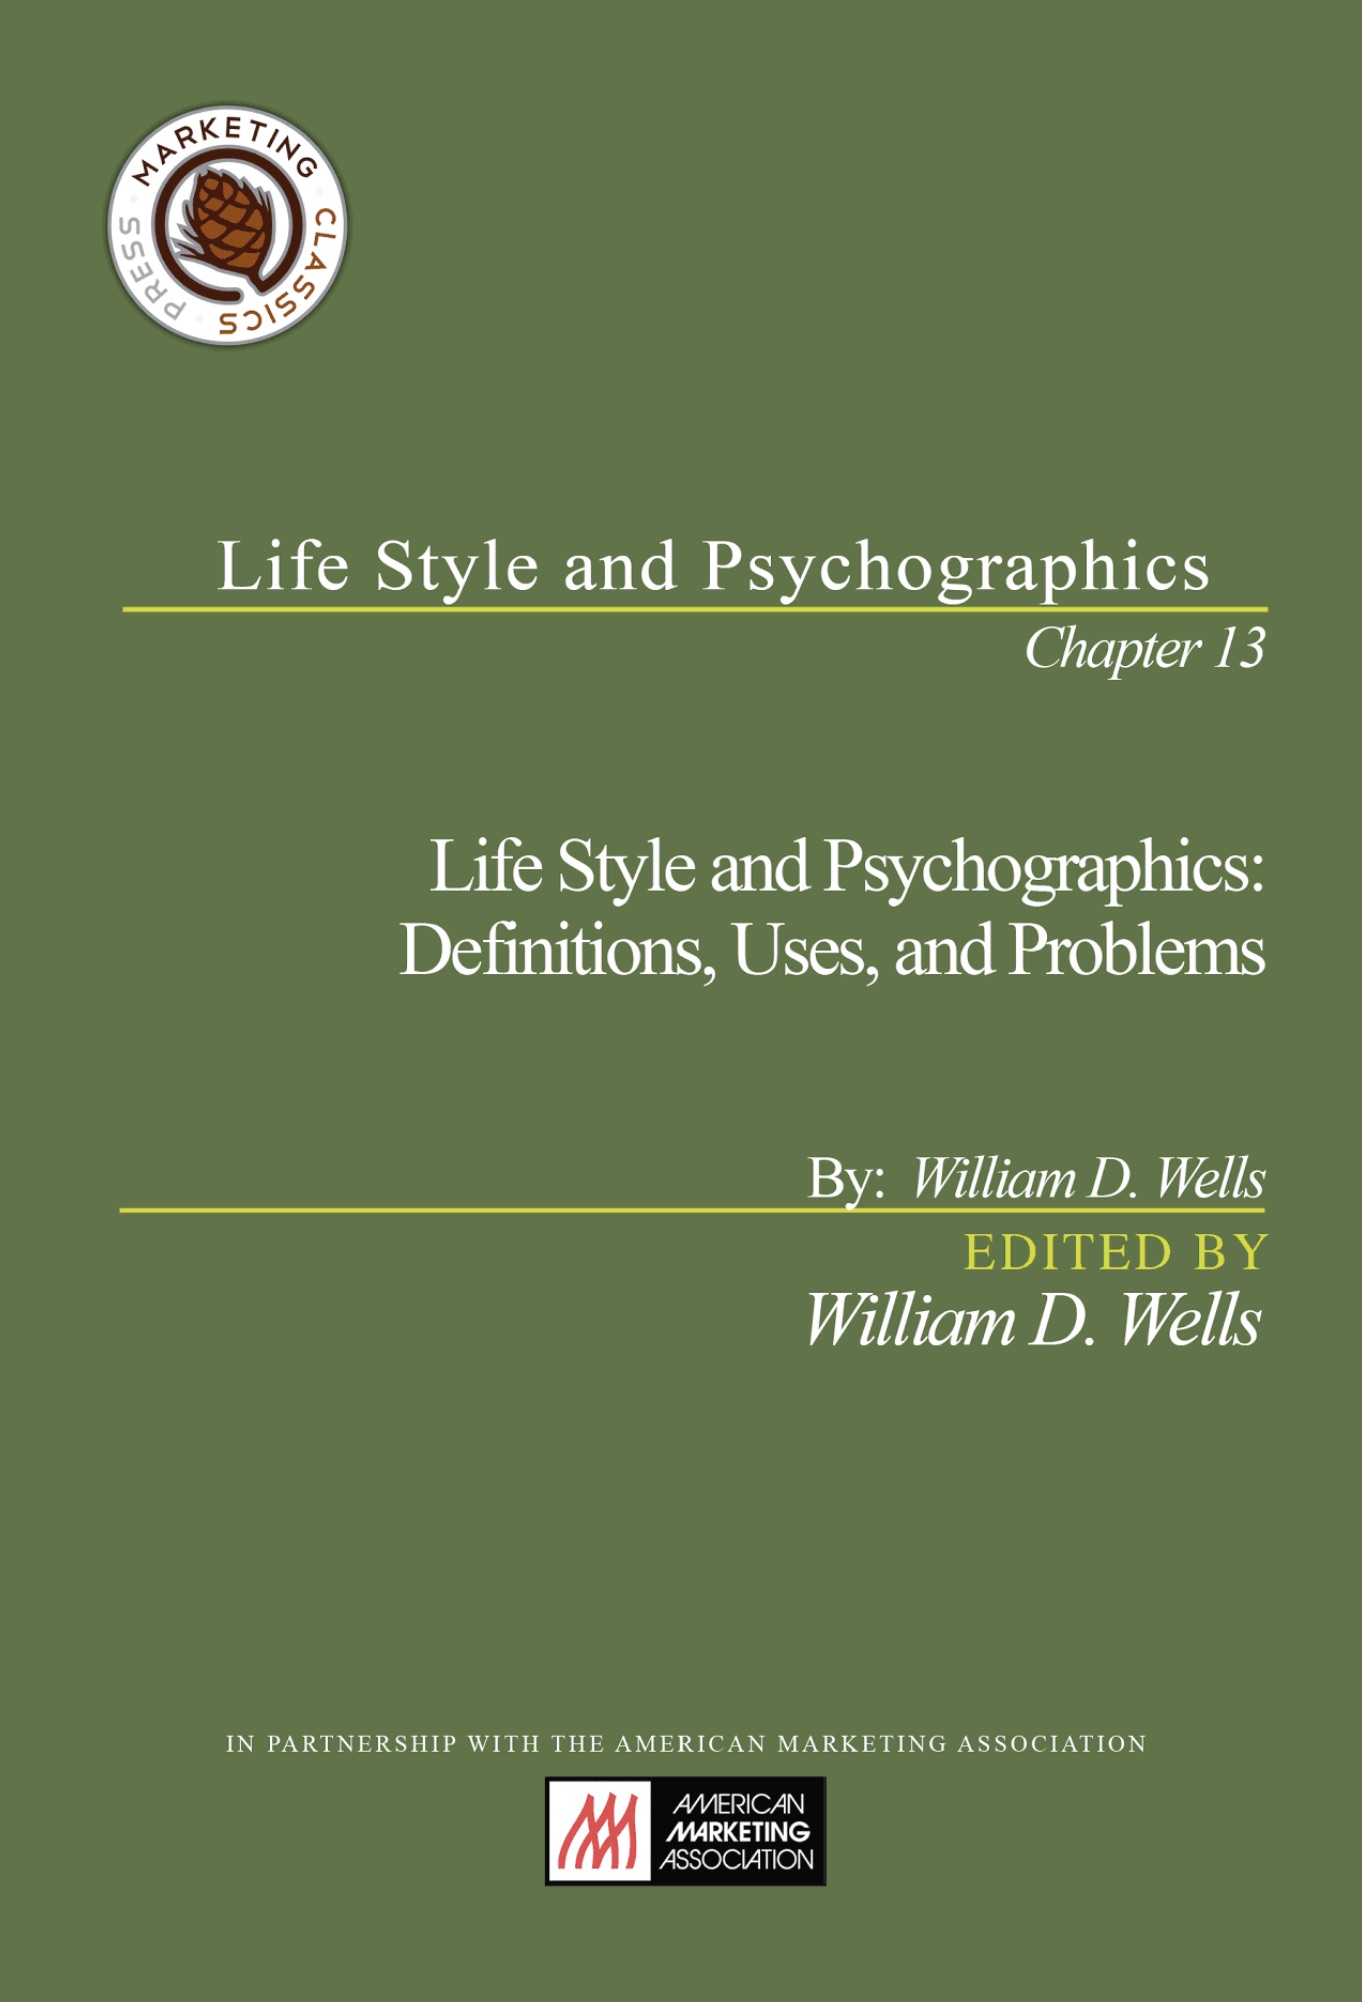 Life Style and Psychographics: Definitions, Uses, and Problems